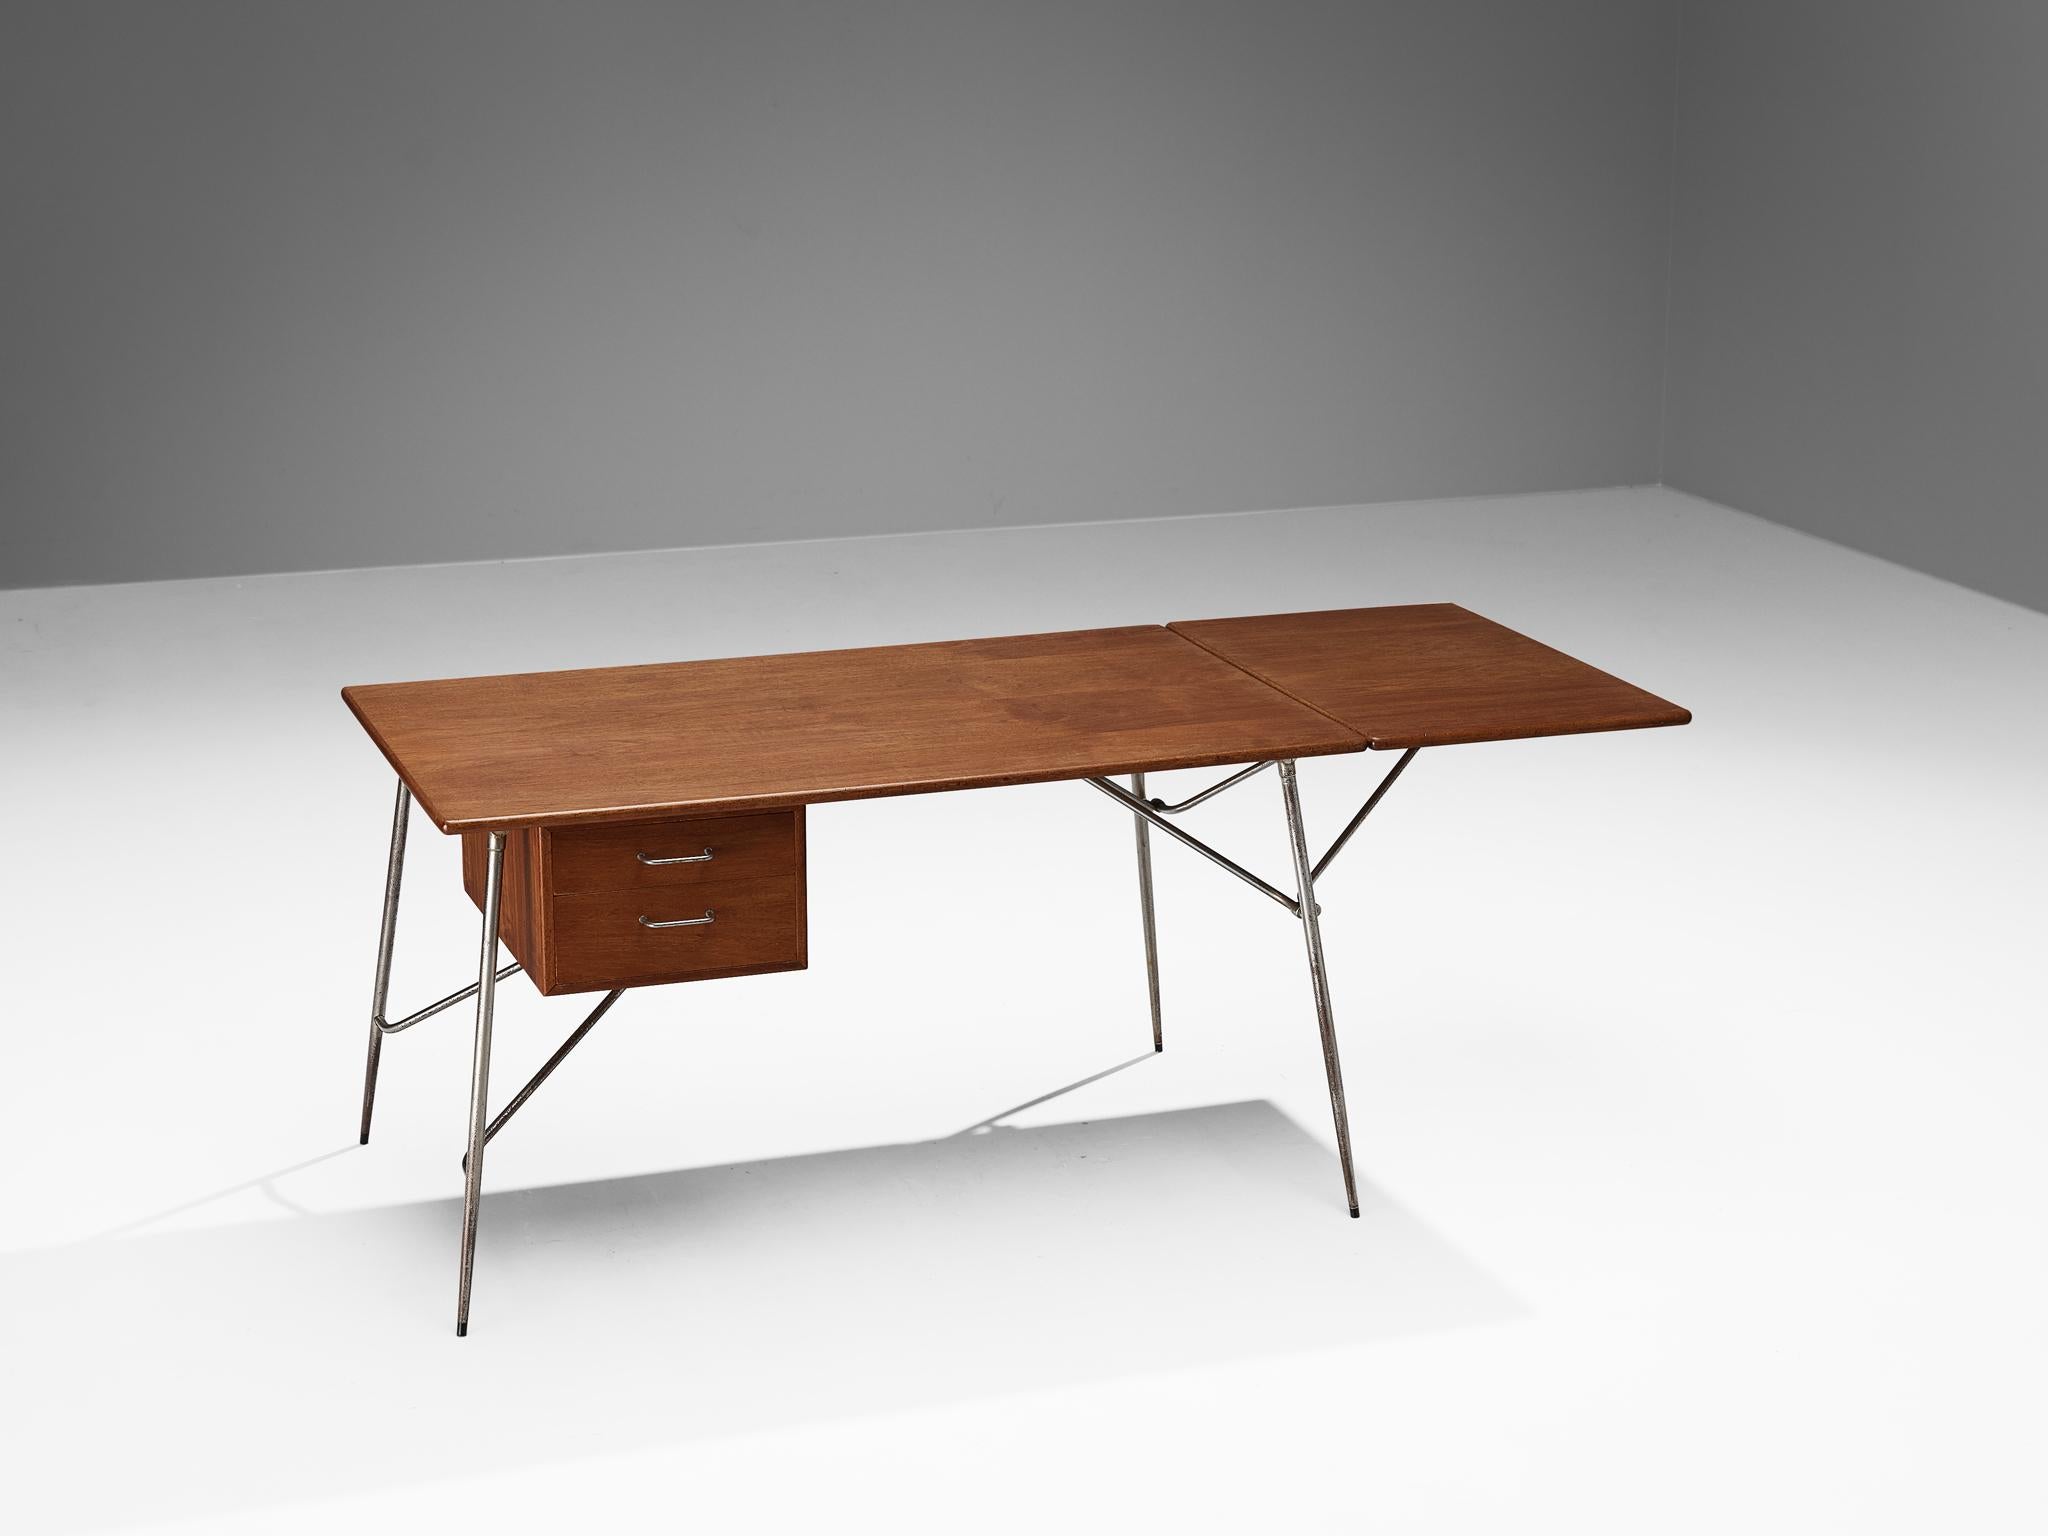 Børge Mogensen for Søborg Møbelfabrik, desk, model '203', teak and steel, Denmark, 1953.

This Scandinavian modern desk features an open construction with clear lines and angular shapes dominating the layout. The tabletop and drawer compartment